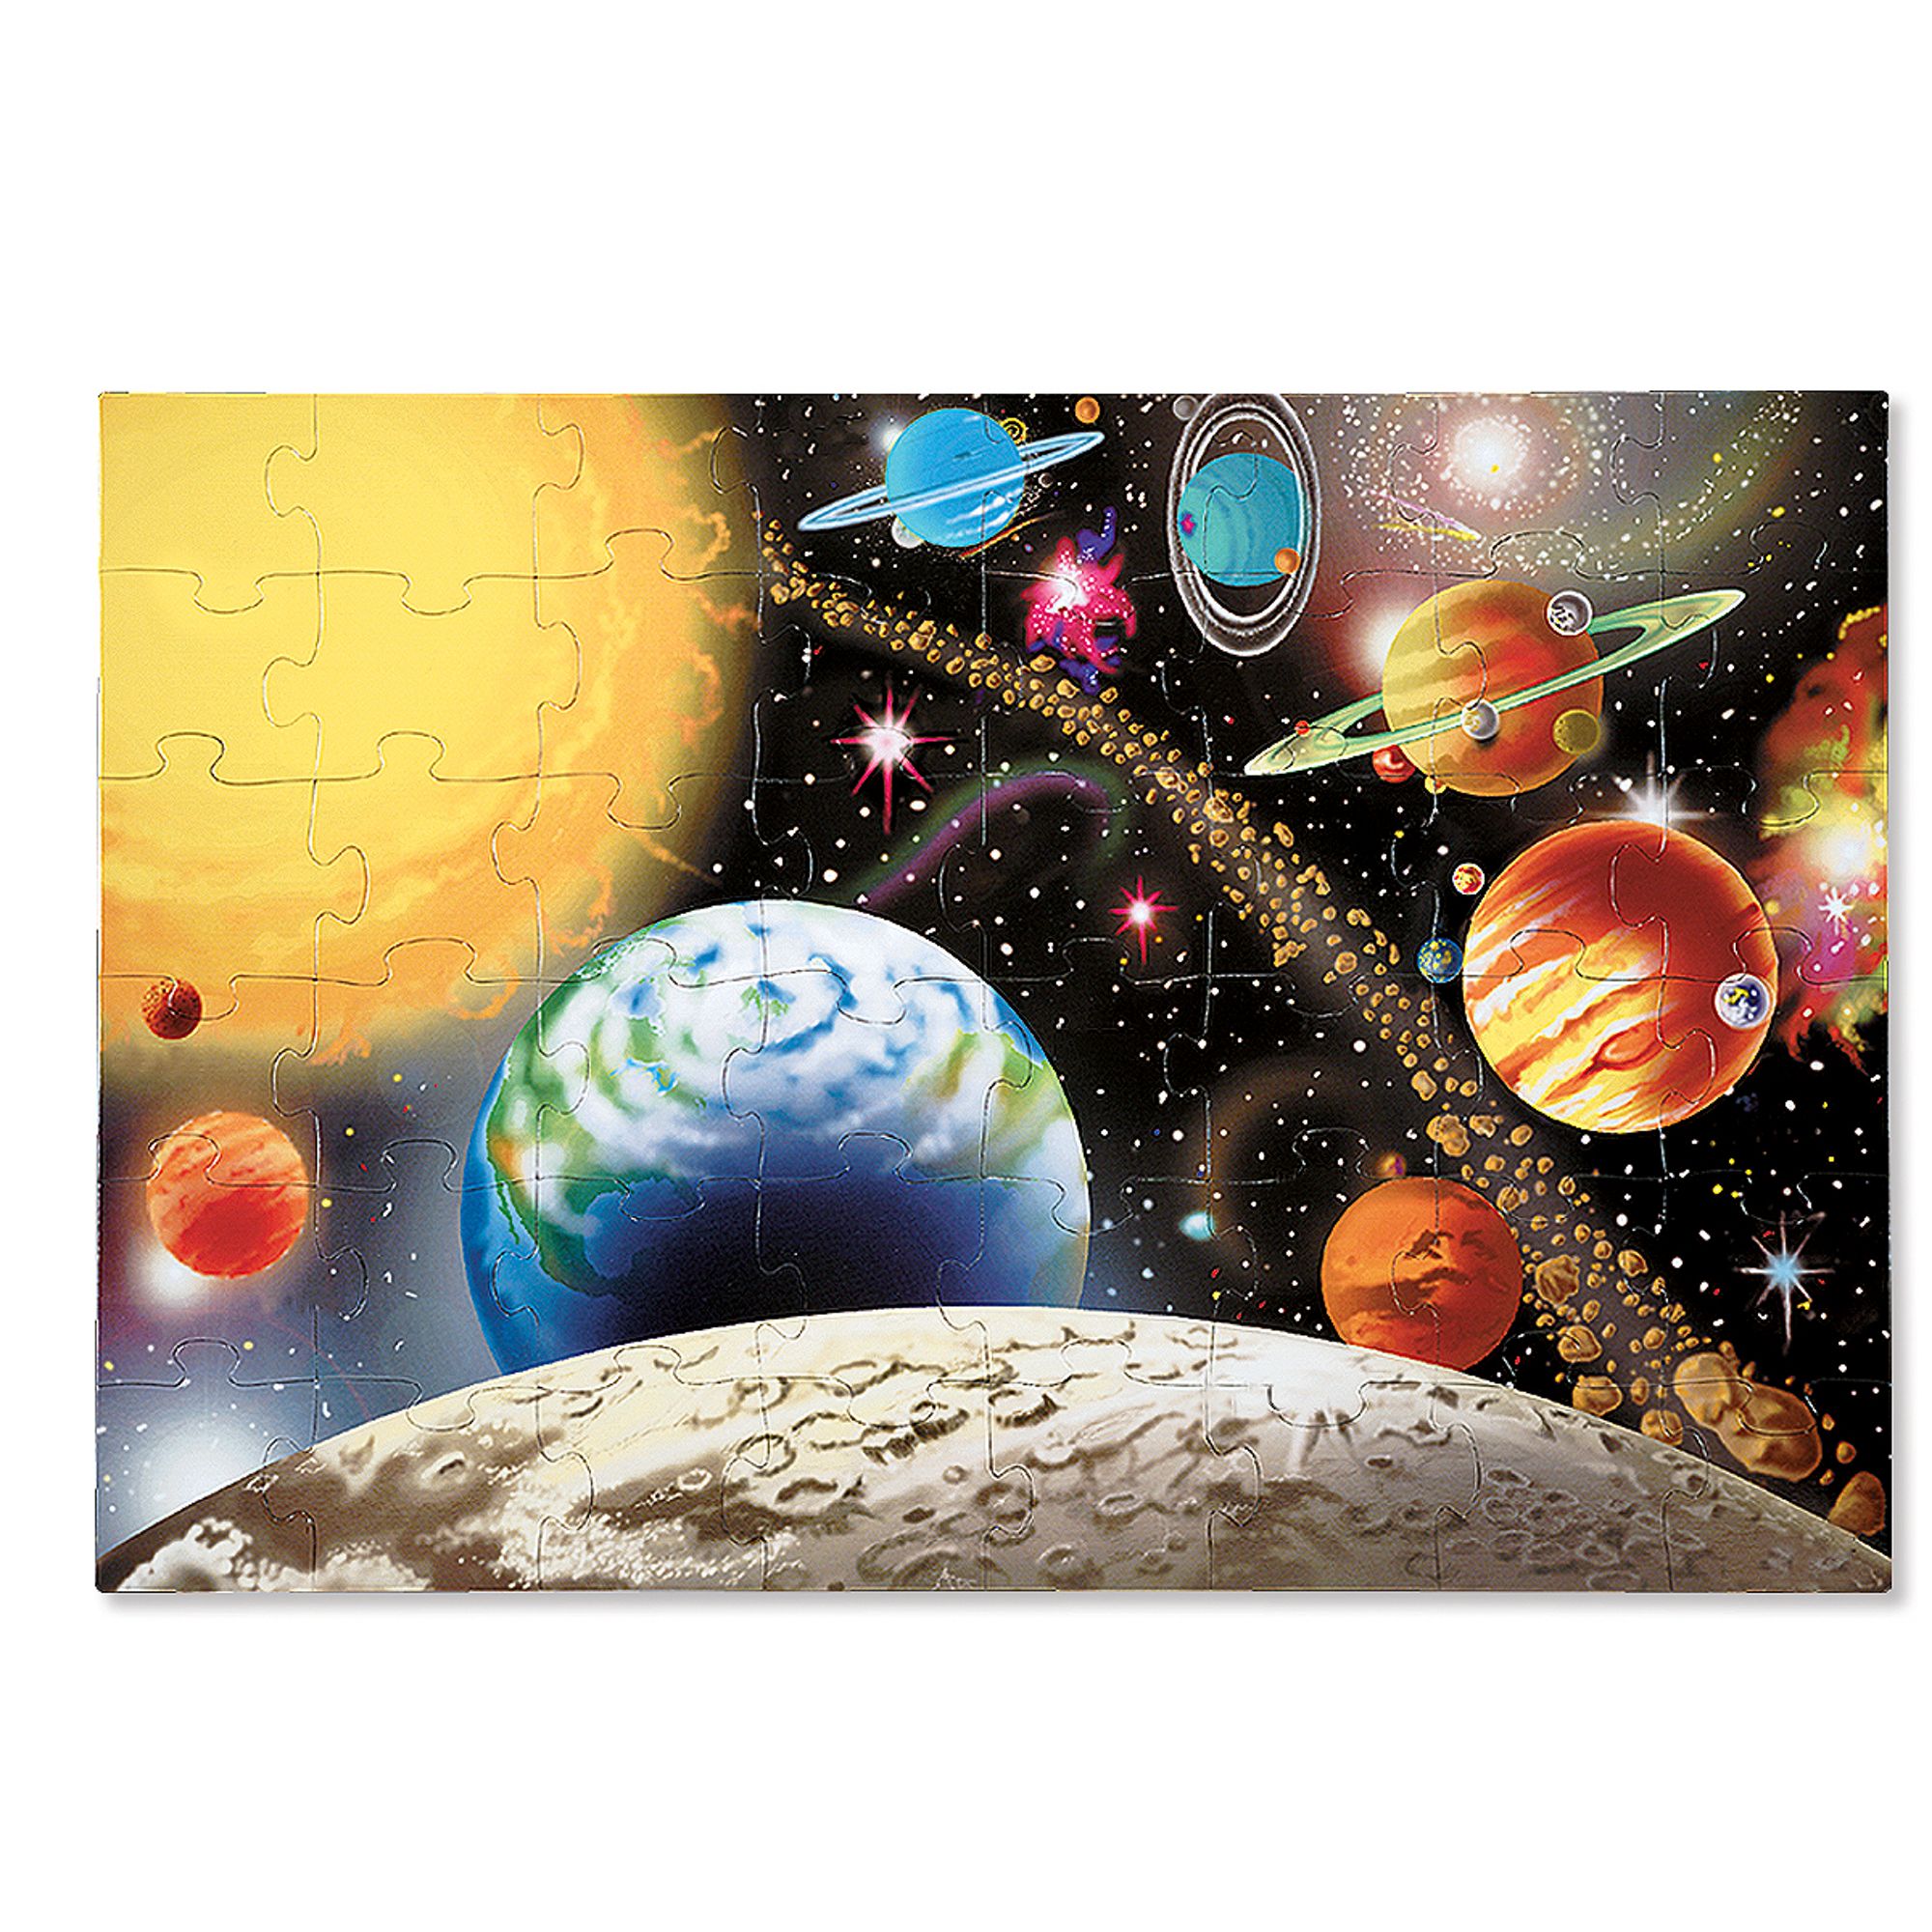 Giant Floor Puzzles G132788 Gls Educational Supplies